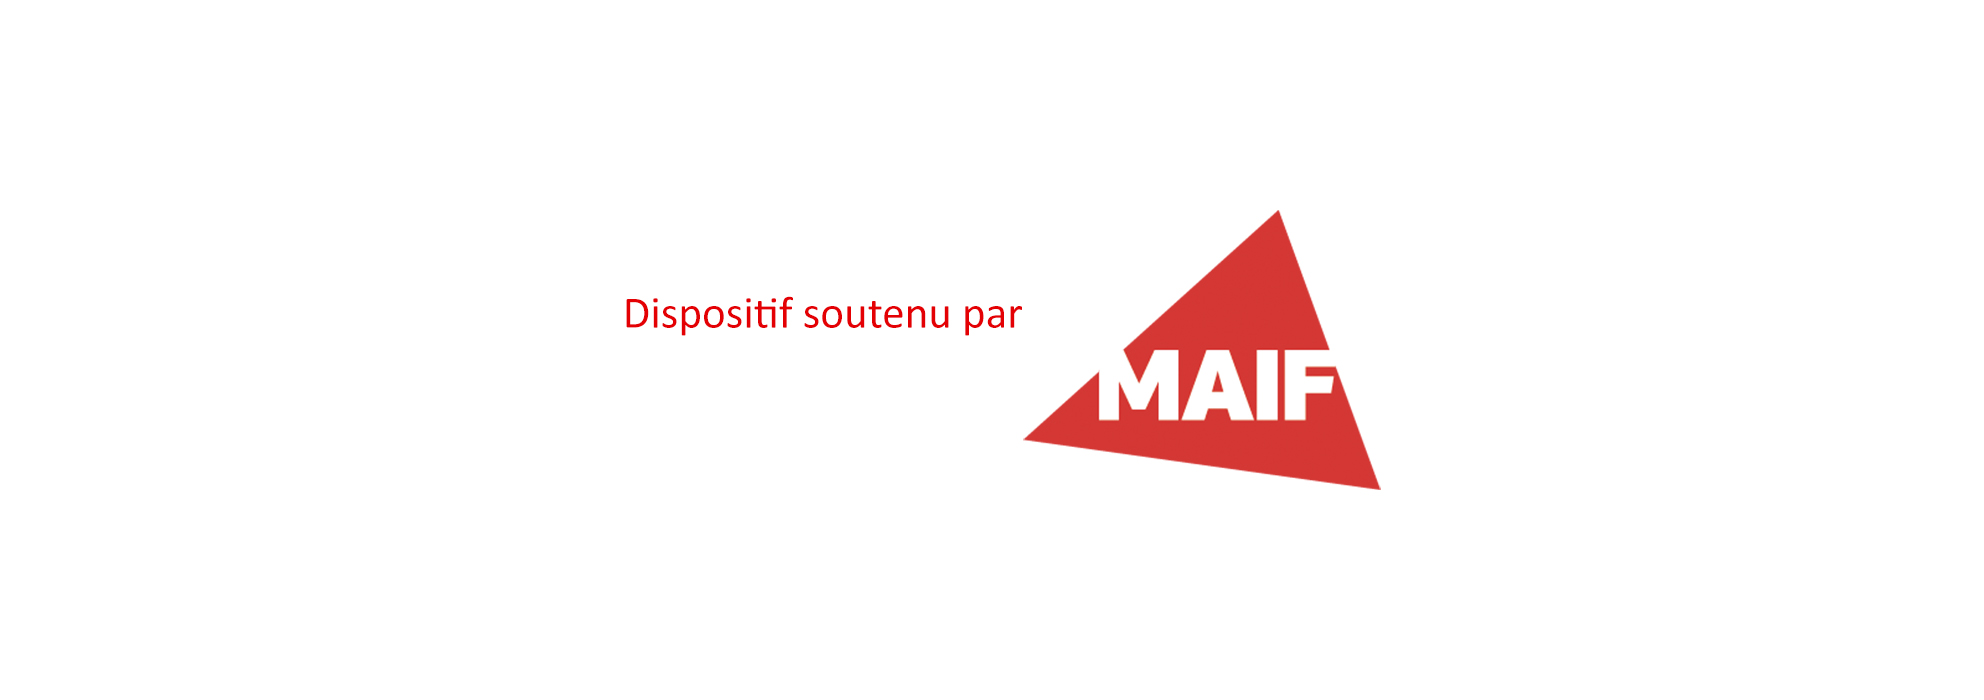 maif article pagaies couleurs